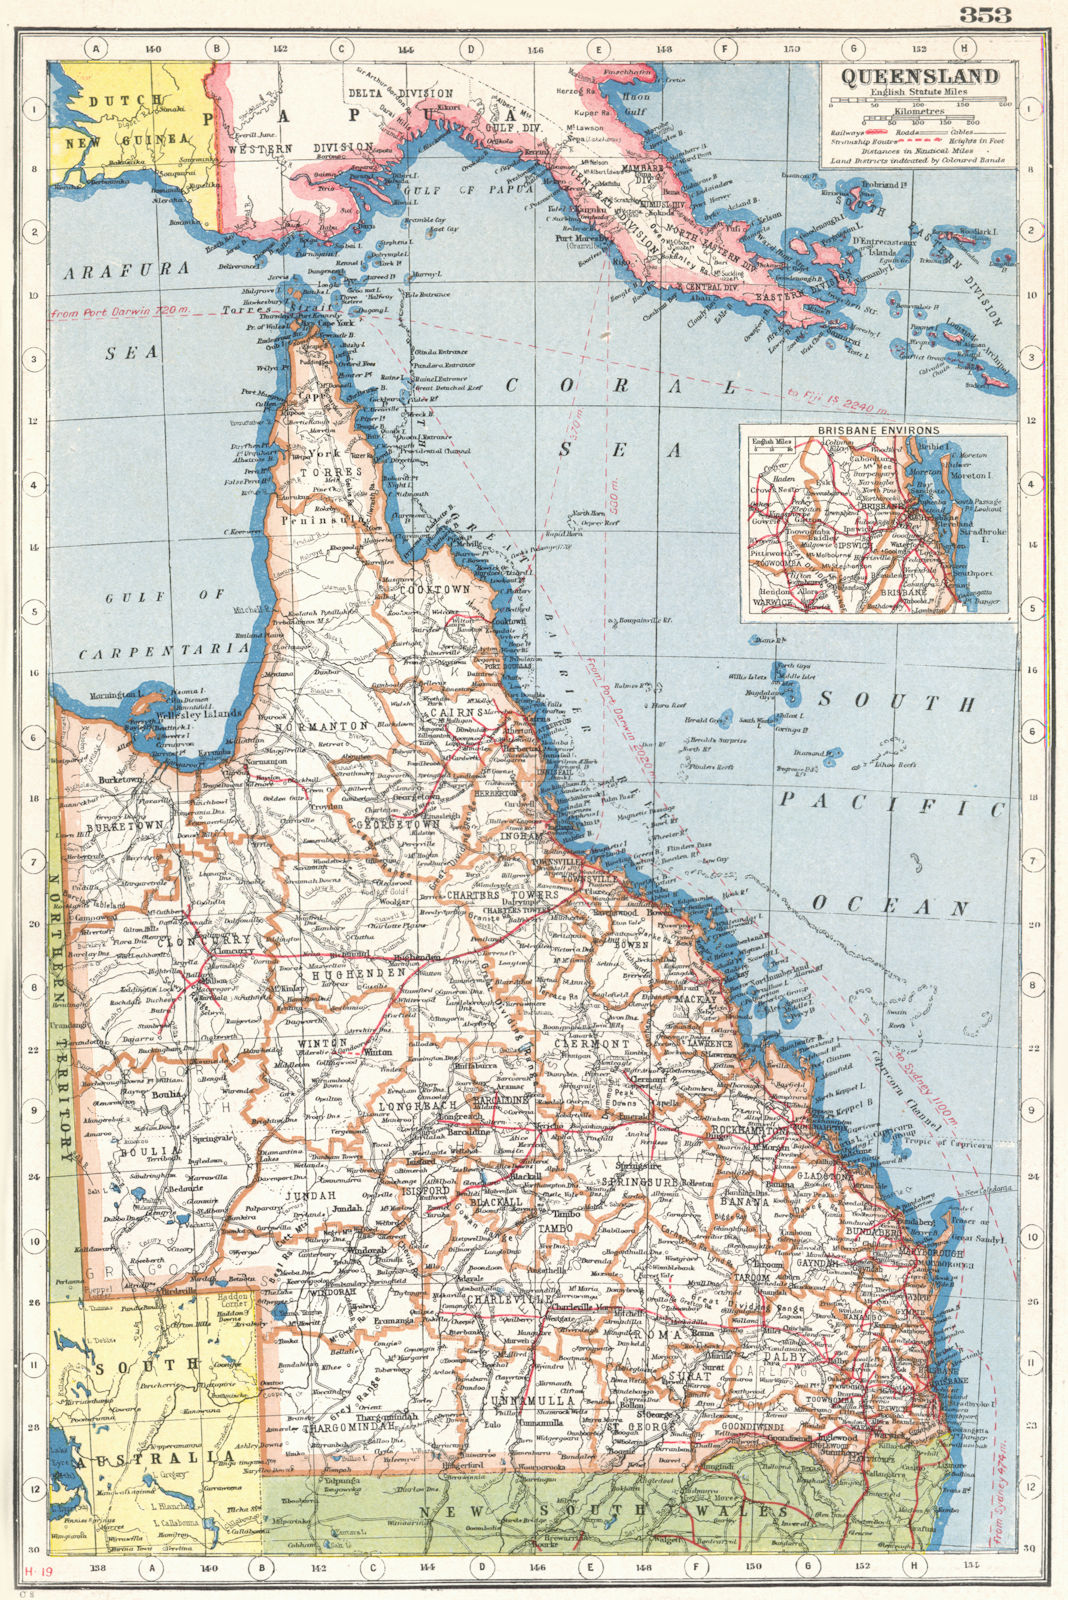 QUEENSLAND. State map showing counties. Inset Brisbane Environs 1920 old